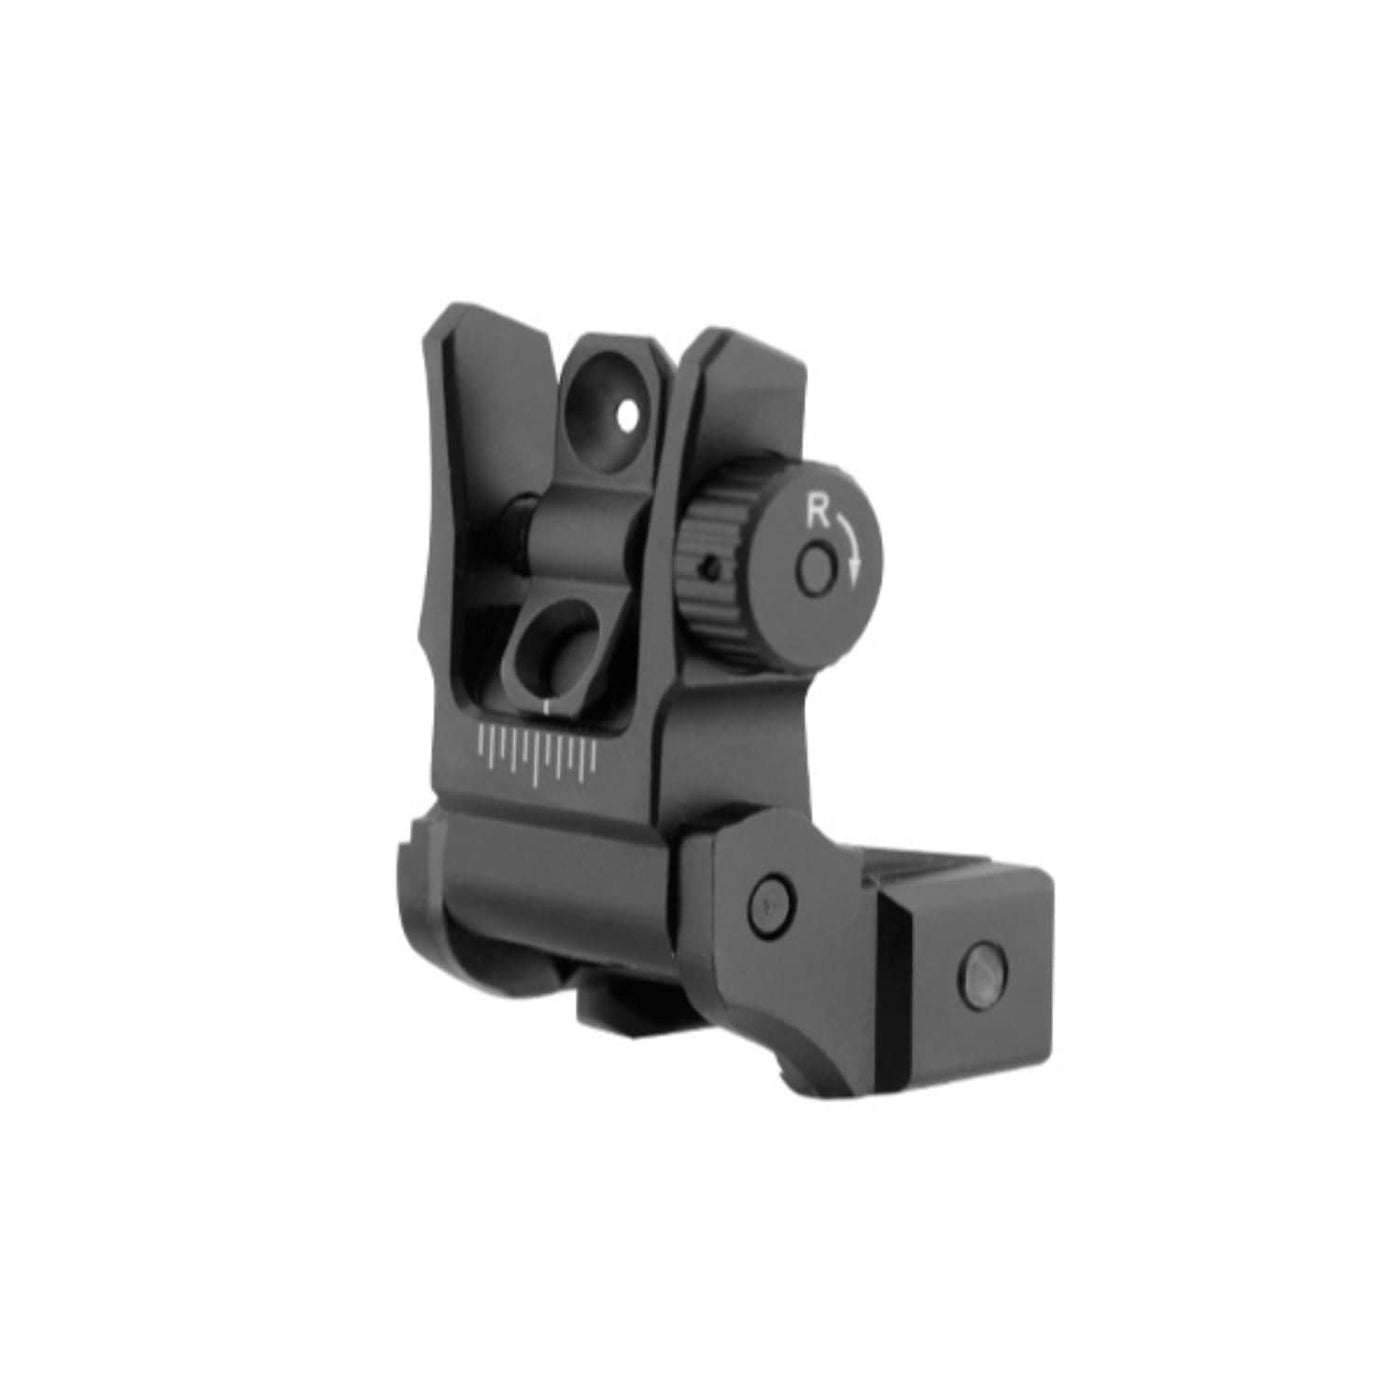 Leapers Leapers UTG AR15 Low Profile Flip-up Rear Sight w Dual Aim Optics And Sights